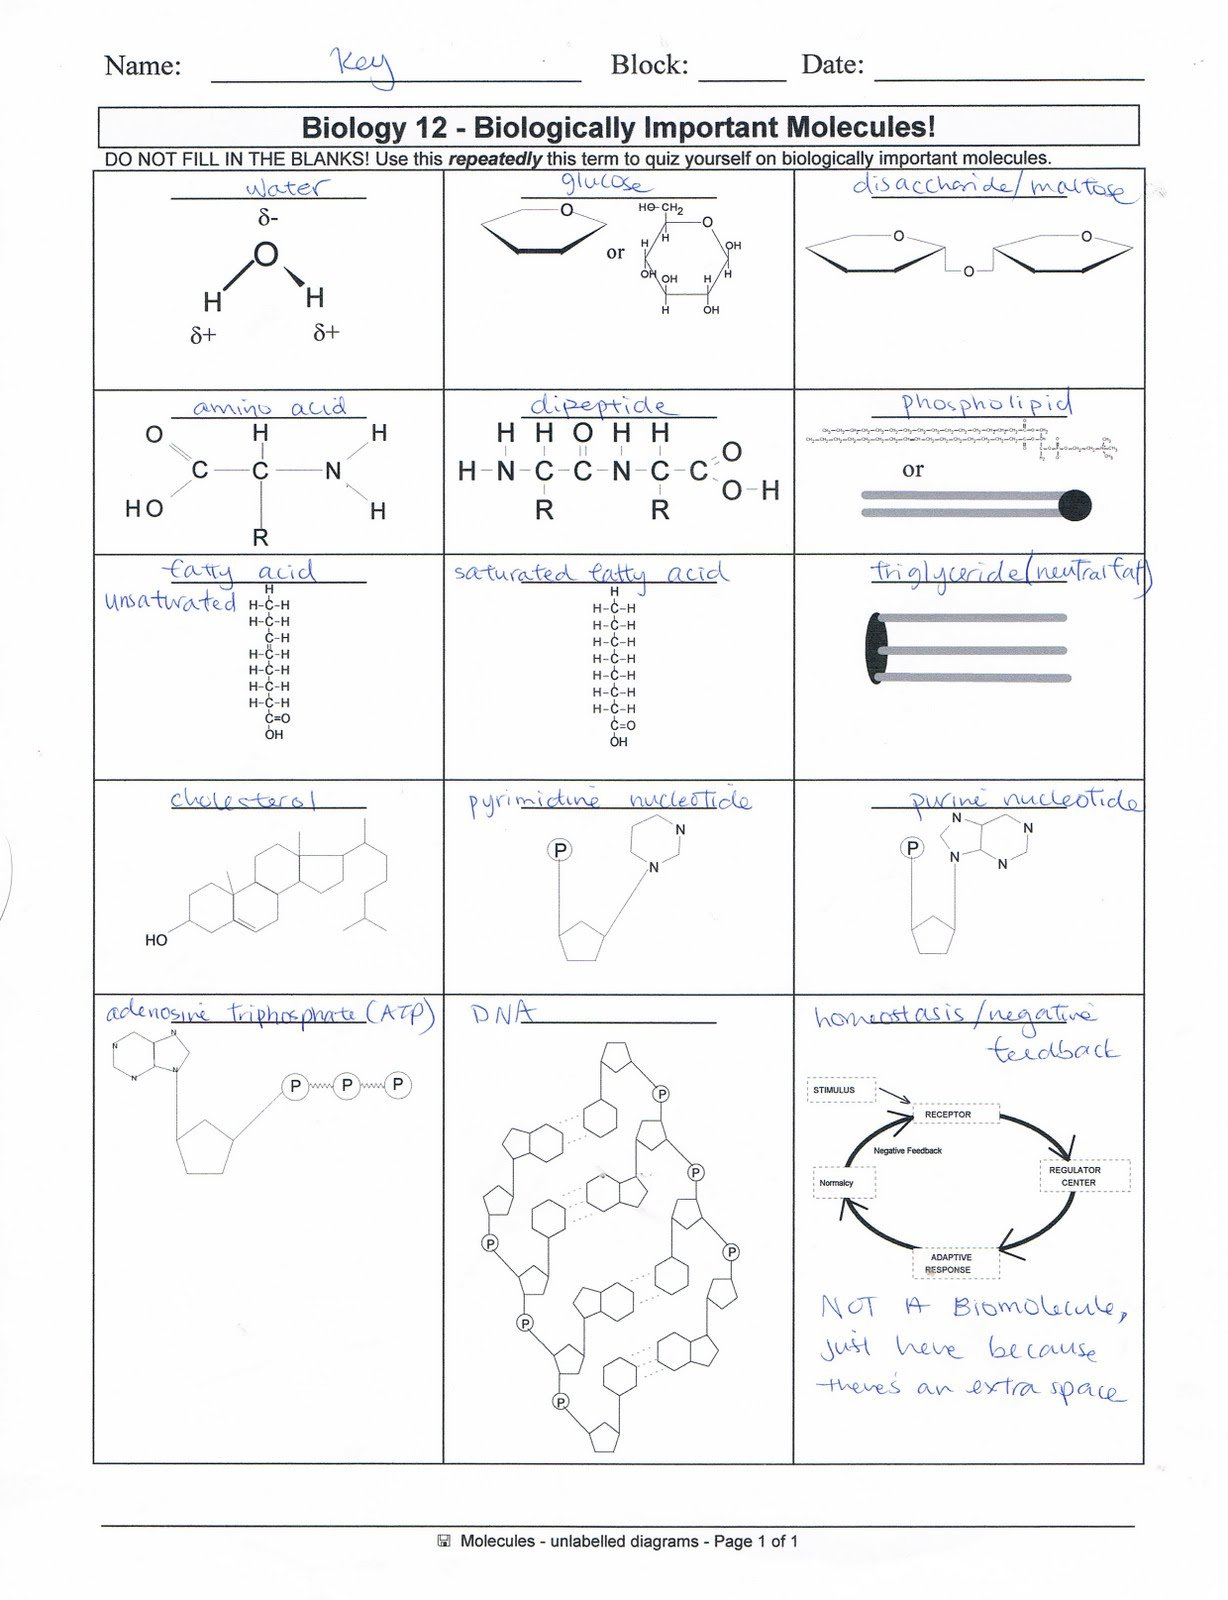 Biological Molecules Worksheet Answers Subtraction With Regrouping Along With Biological Molecules Worksheet